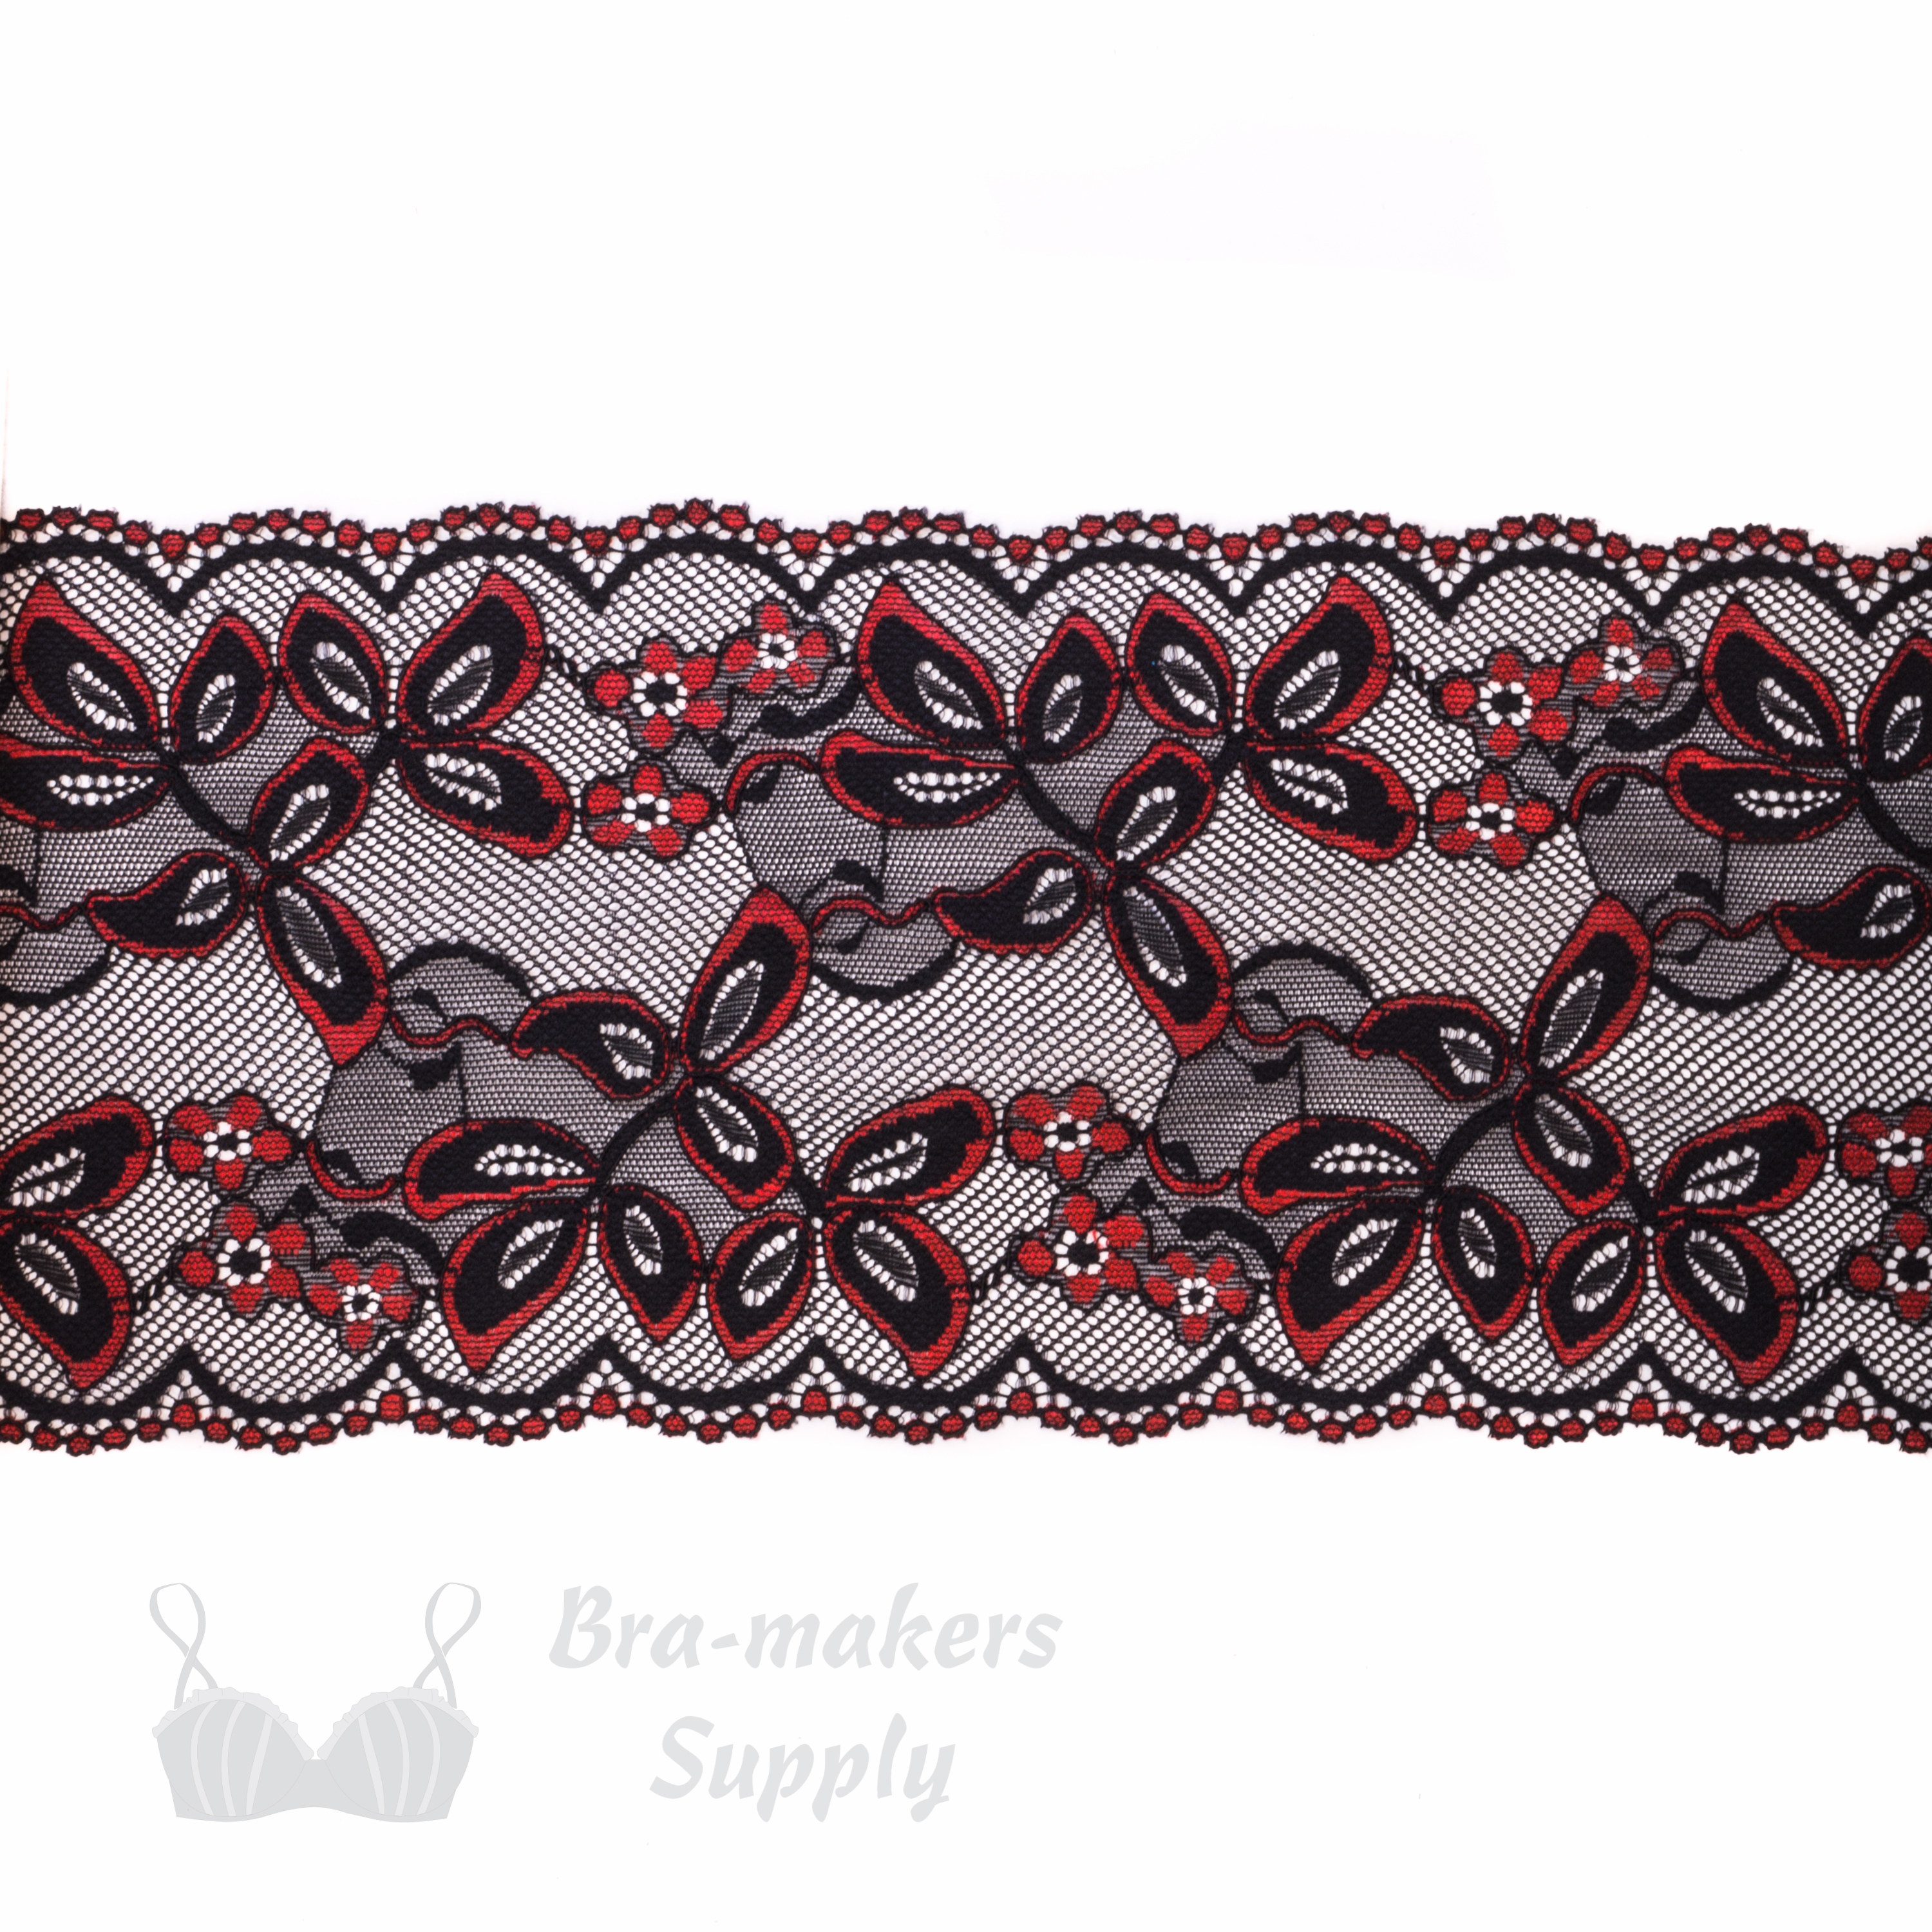 Five Inch Warm Red Black Floral Stretch Lace - Bra-Makers Supply